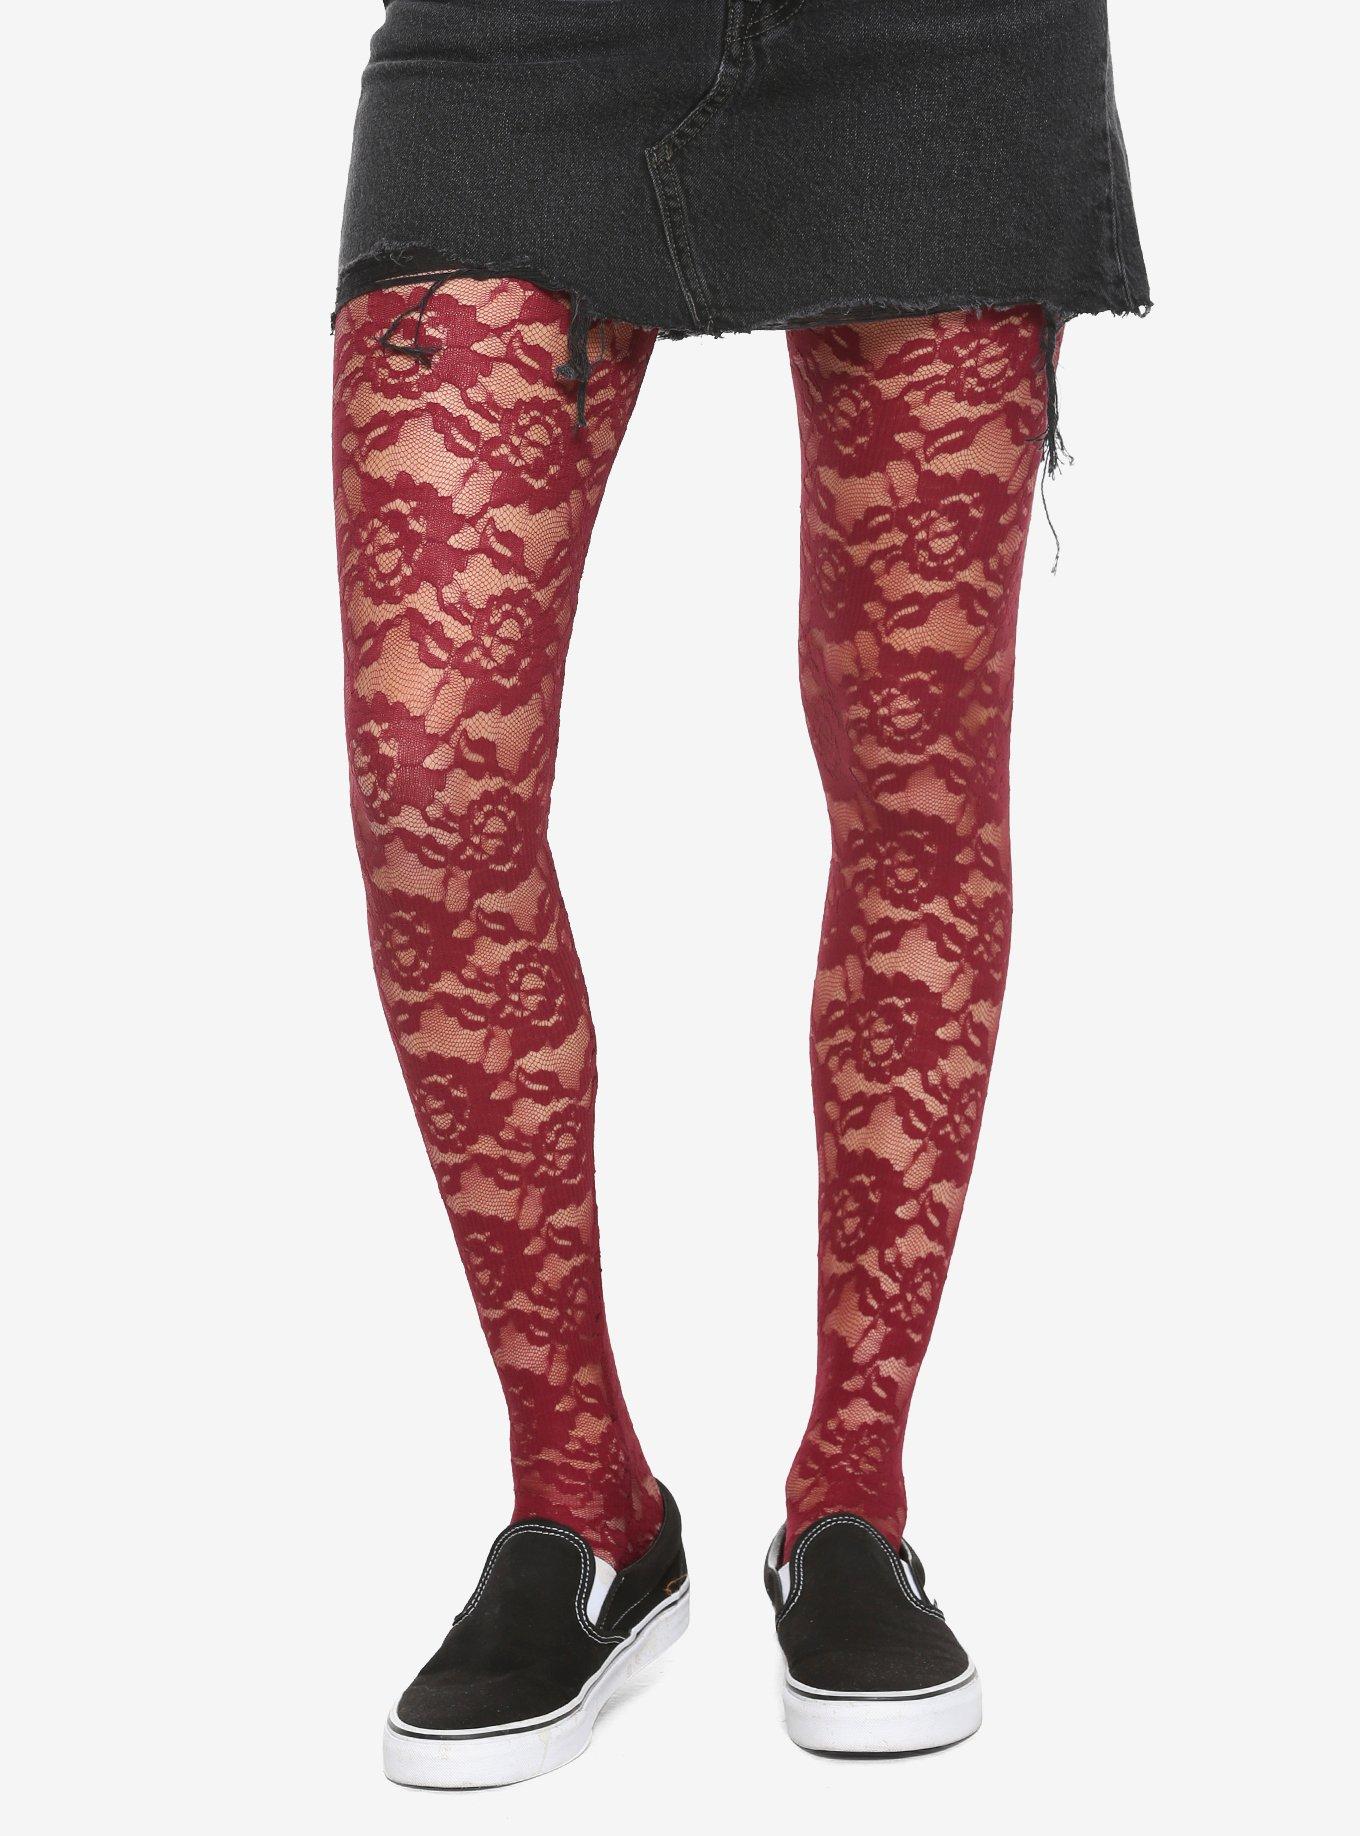 Burgundy Lace Tights - Lace Fishnet Tights - Fall Accessories - Lulus